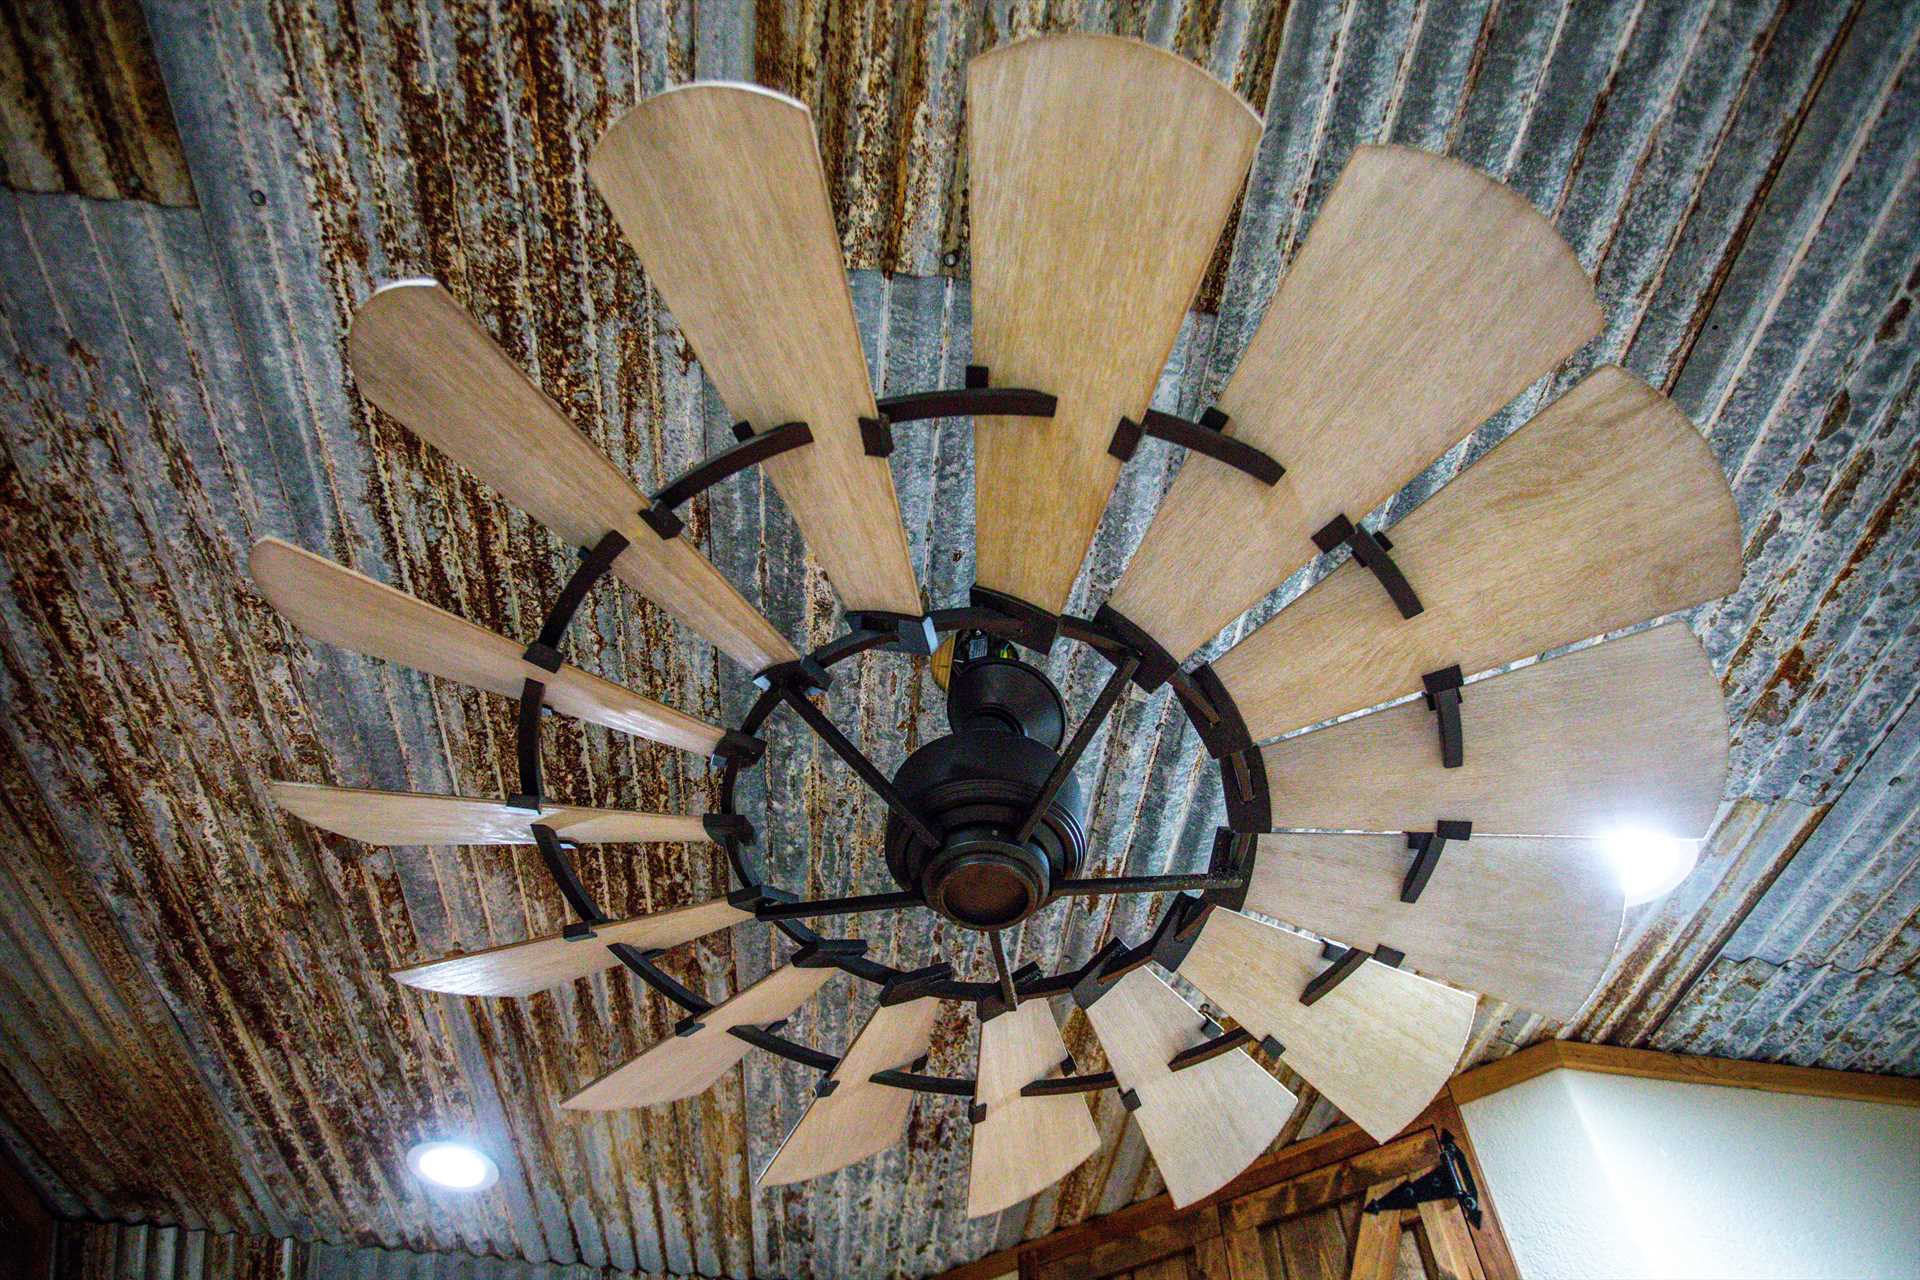                                                 Look up! Or you'll miss this fascinating and functional windmill-style ceiling fan. Along with central air and heat, you'll be comfy at Lonesome Dove.